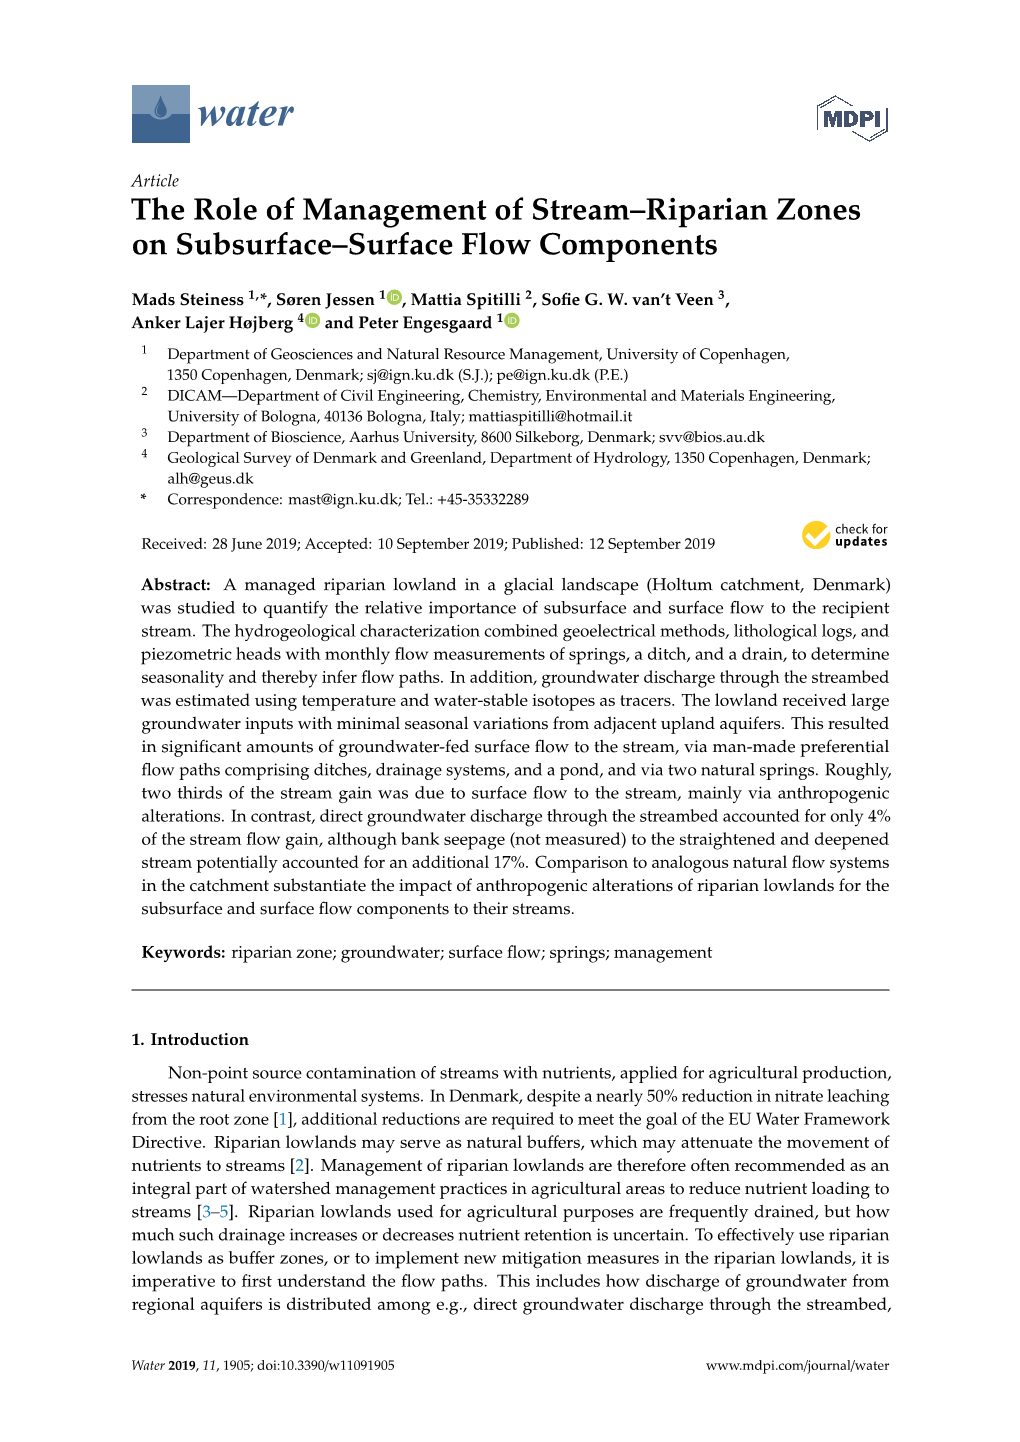 The Role of Management of Stream–Riparian Zones on Subsurface–Surface Flow Components